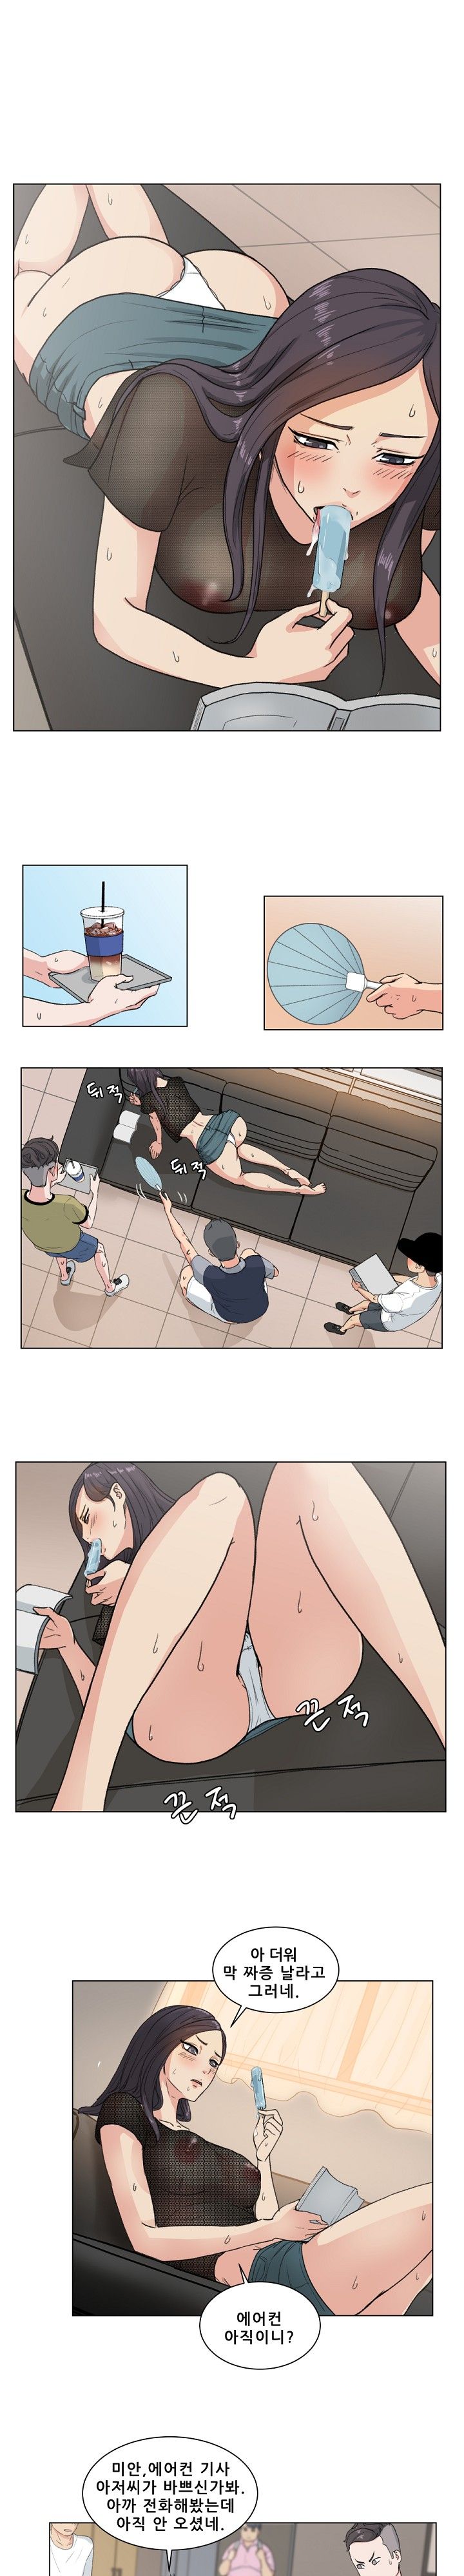 Sooyung Comic Shop Raw - Chapter 1 Page 3